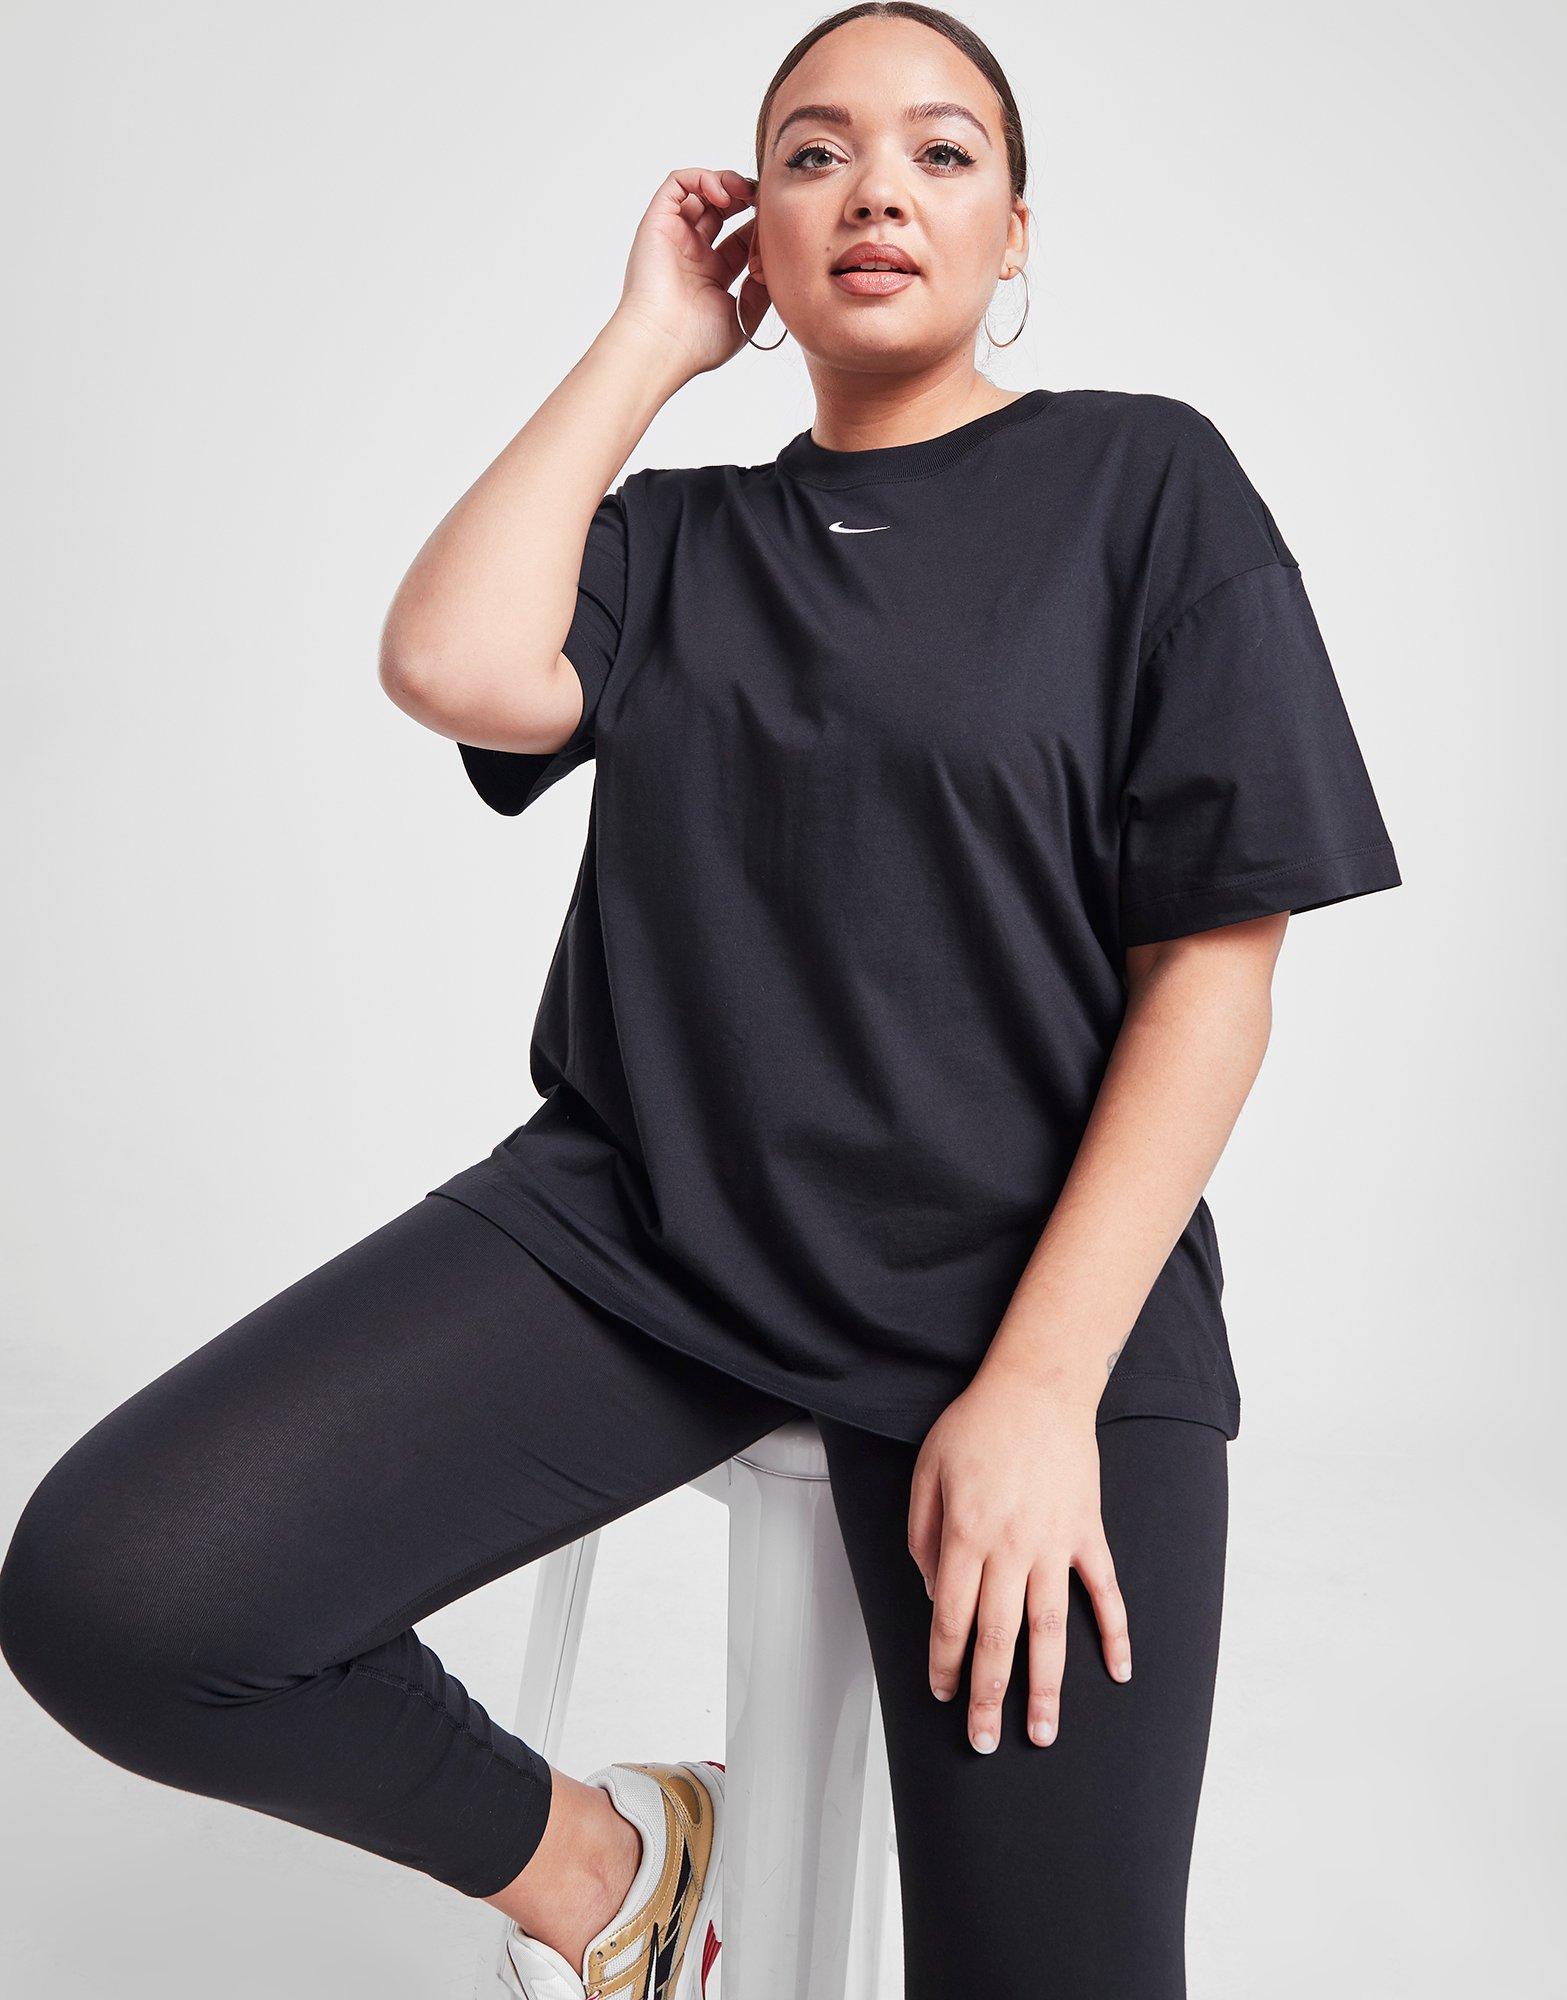 nike outfits plus size